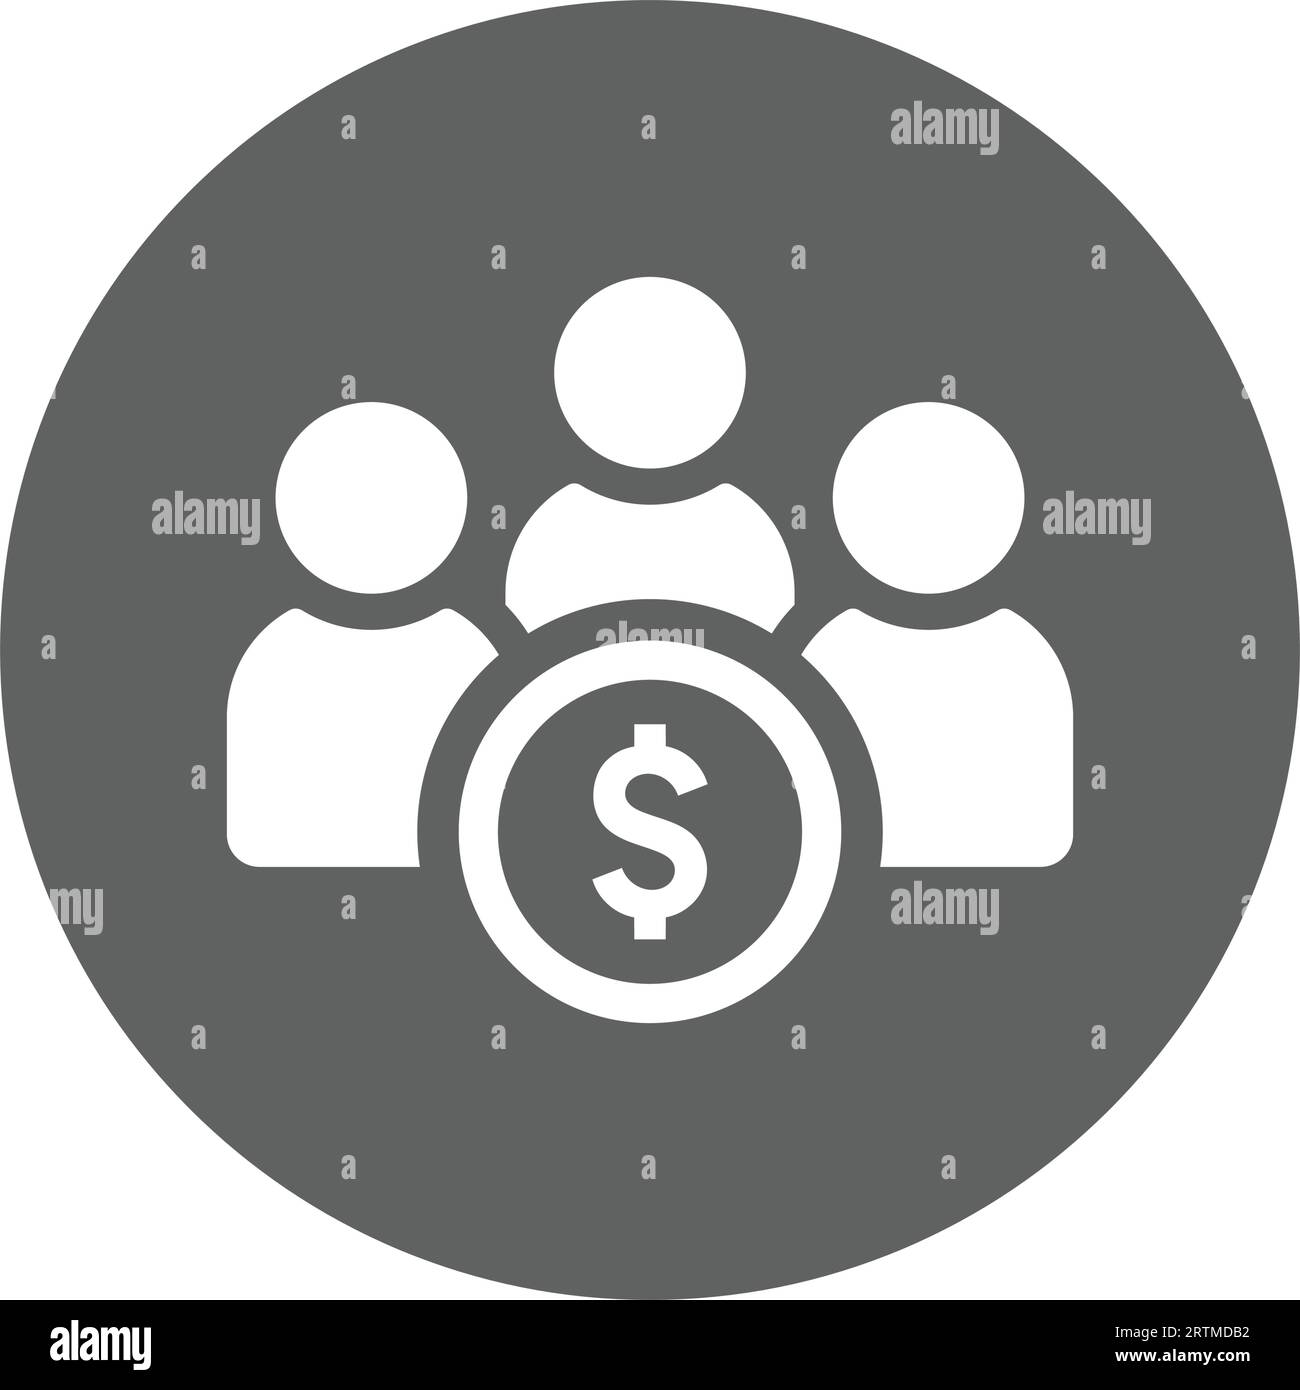 Group Money icon. Stunning design suitable for web, print media, online design, commercial use, or any type of design project. Stock Vector